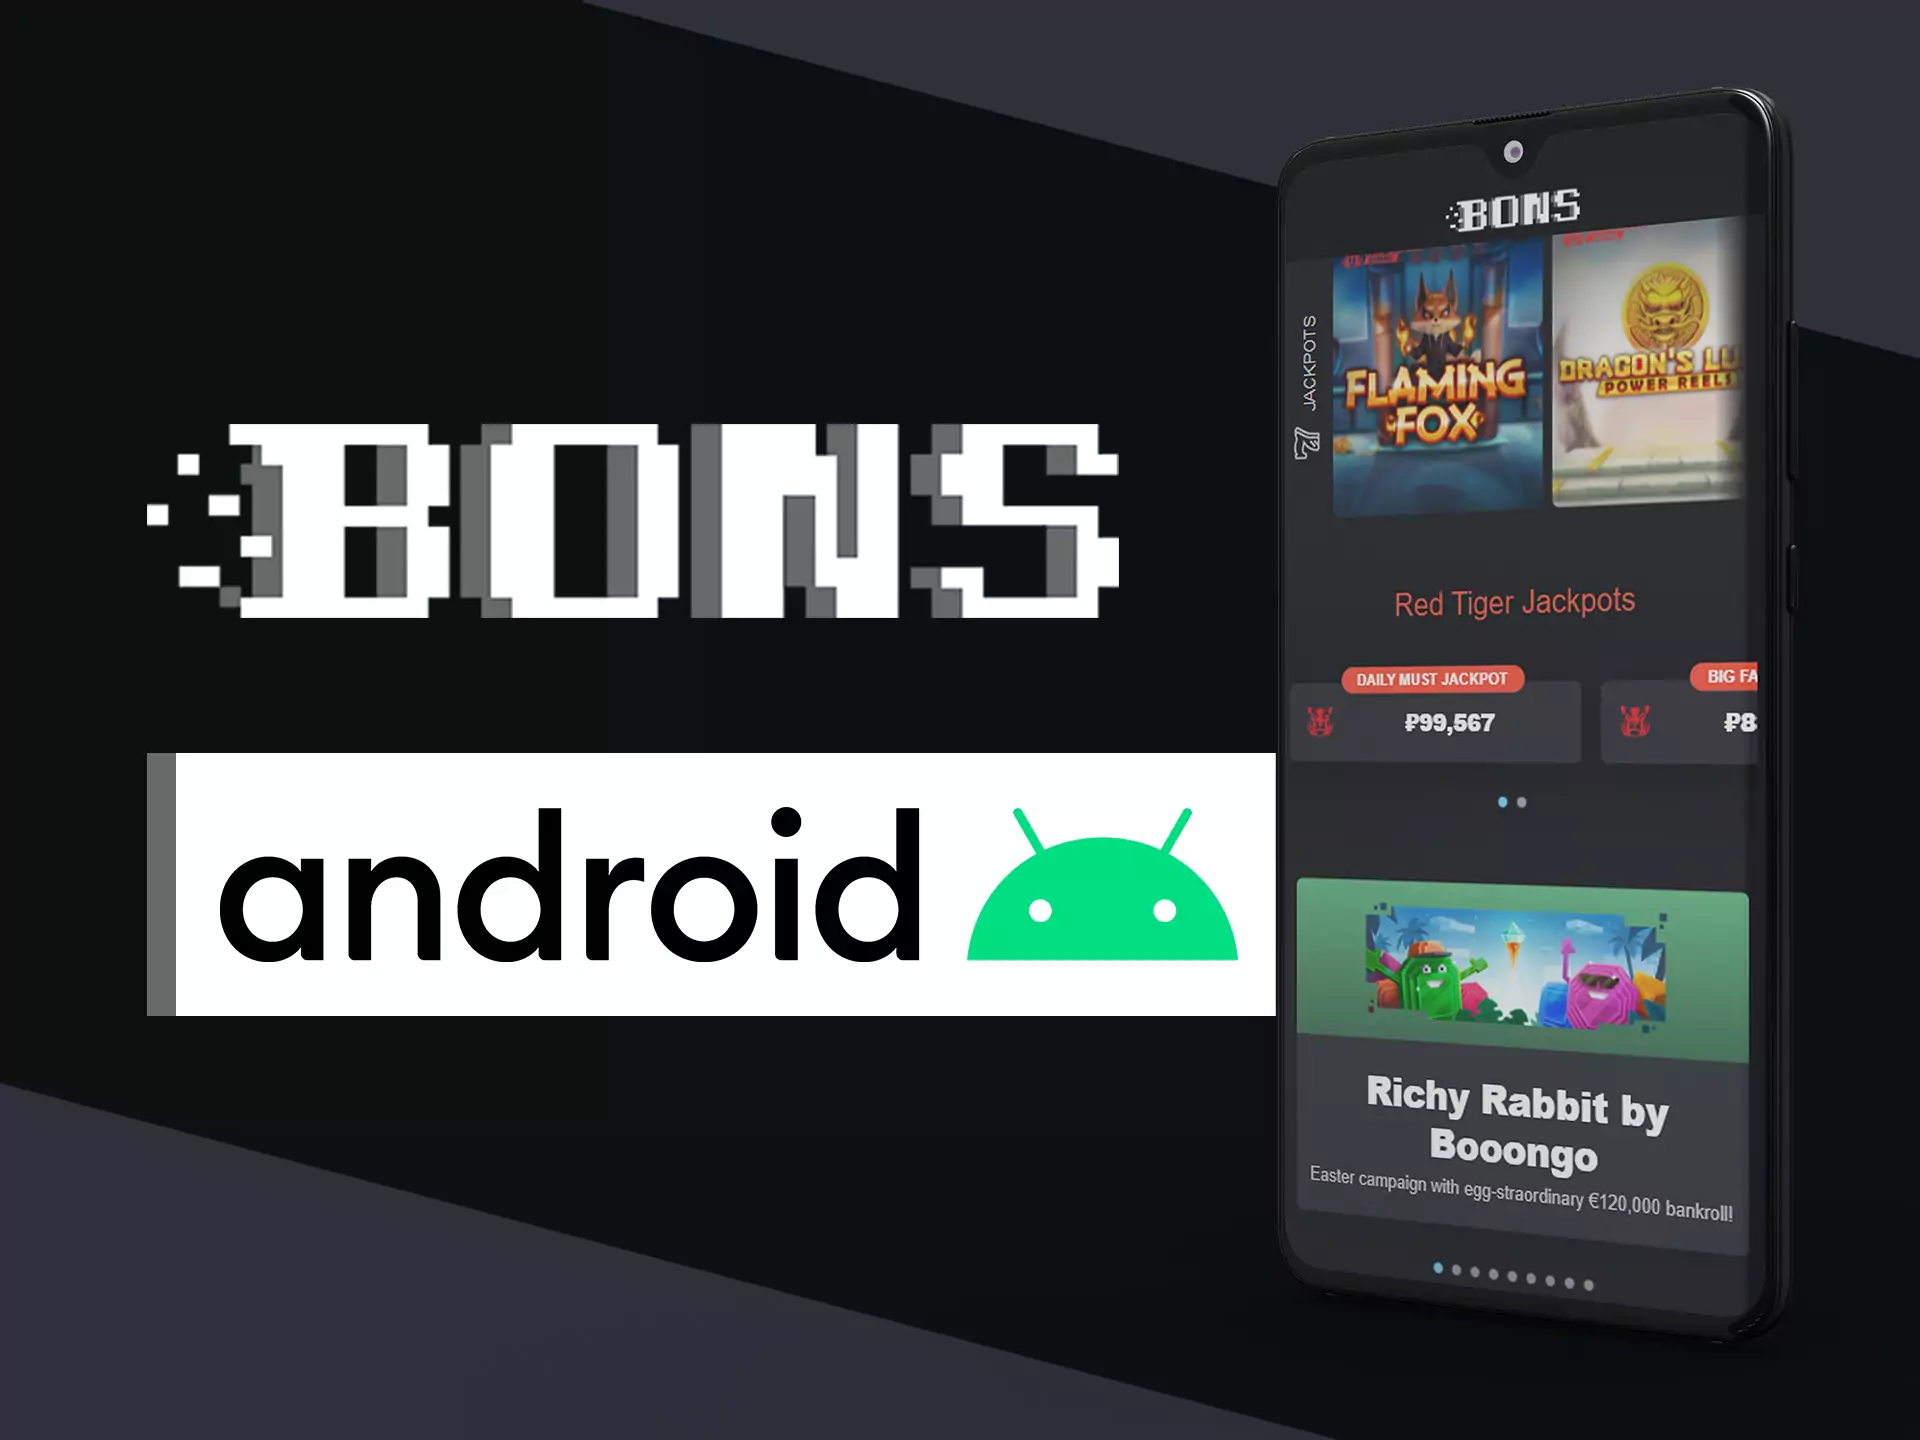 The Bons app works steadily on modern Android smartphones.